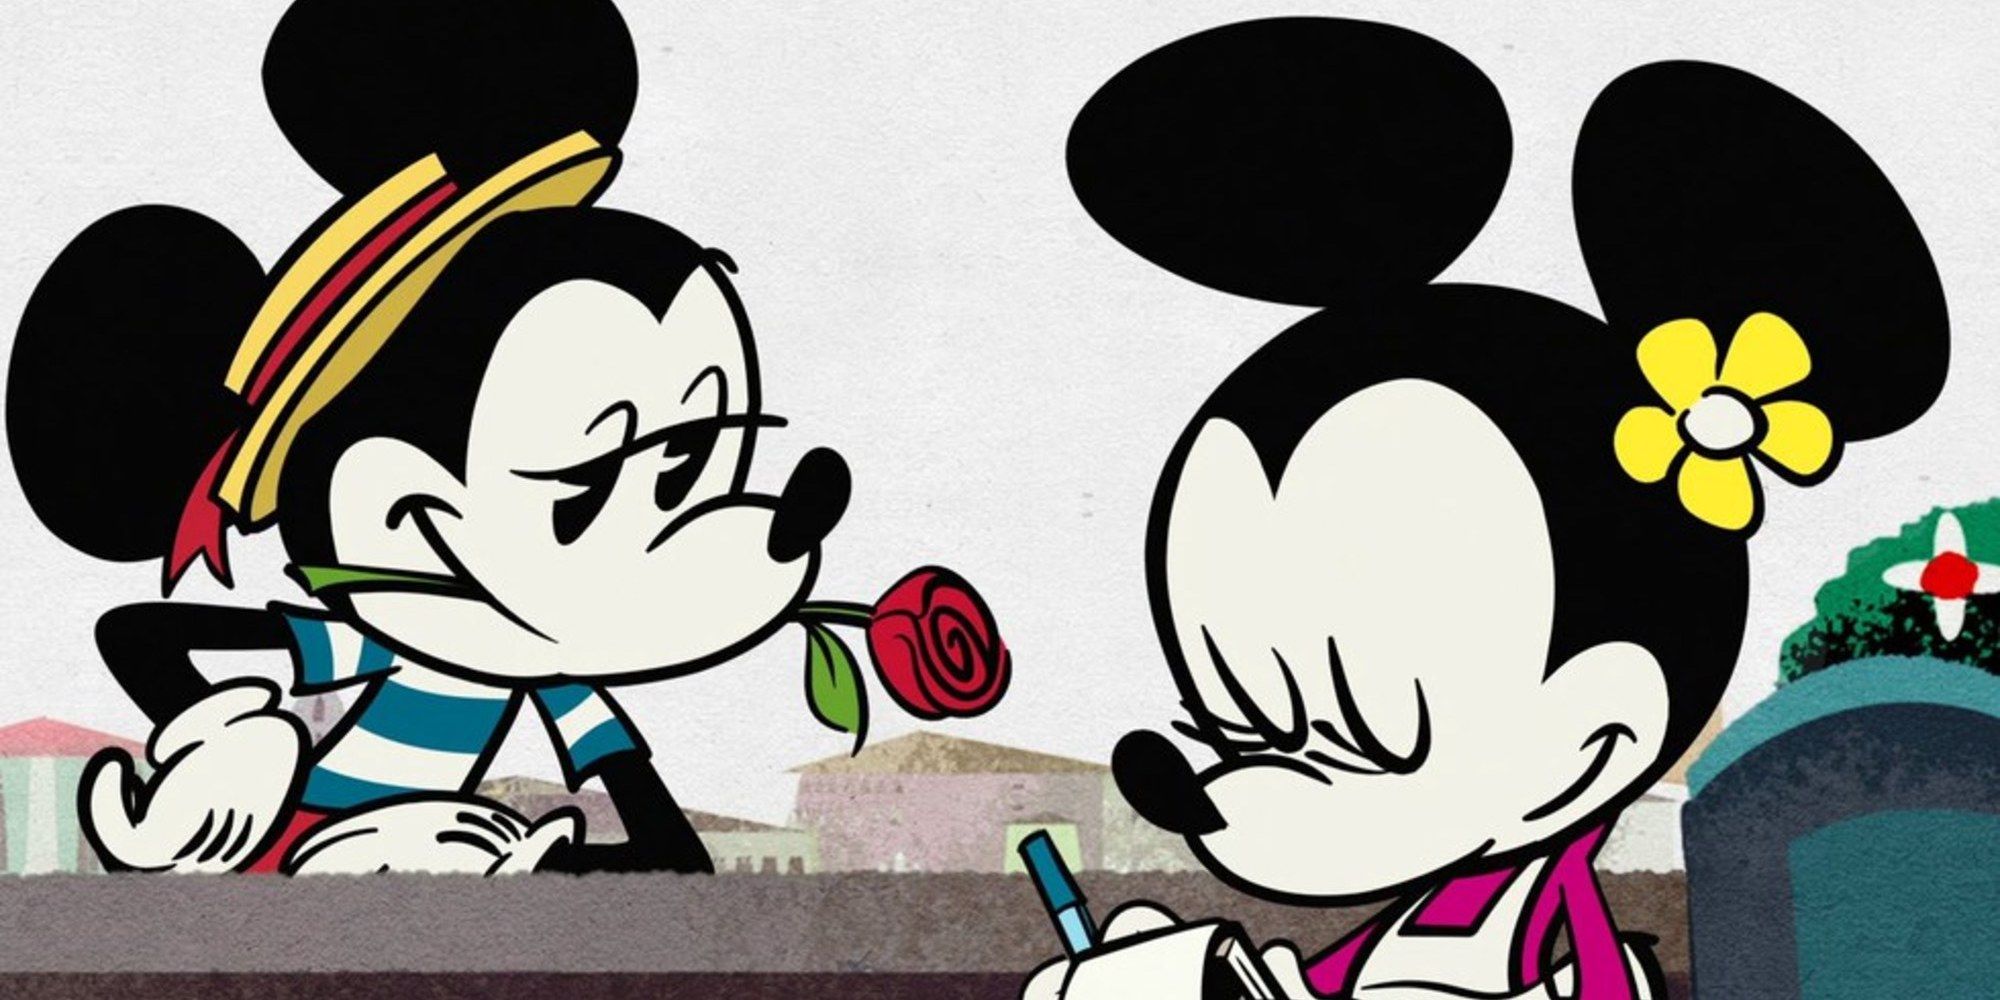 Mickey Mouse holding a rose in his mouth and talking to Minnie Mouse